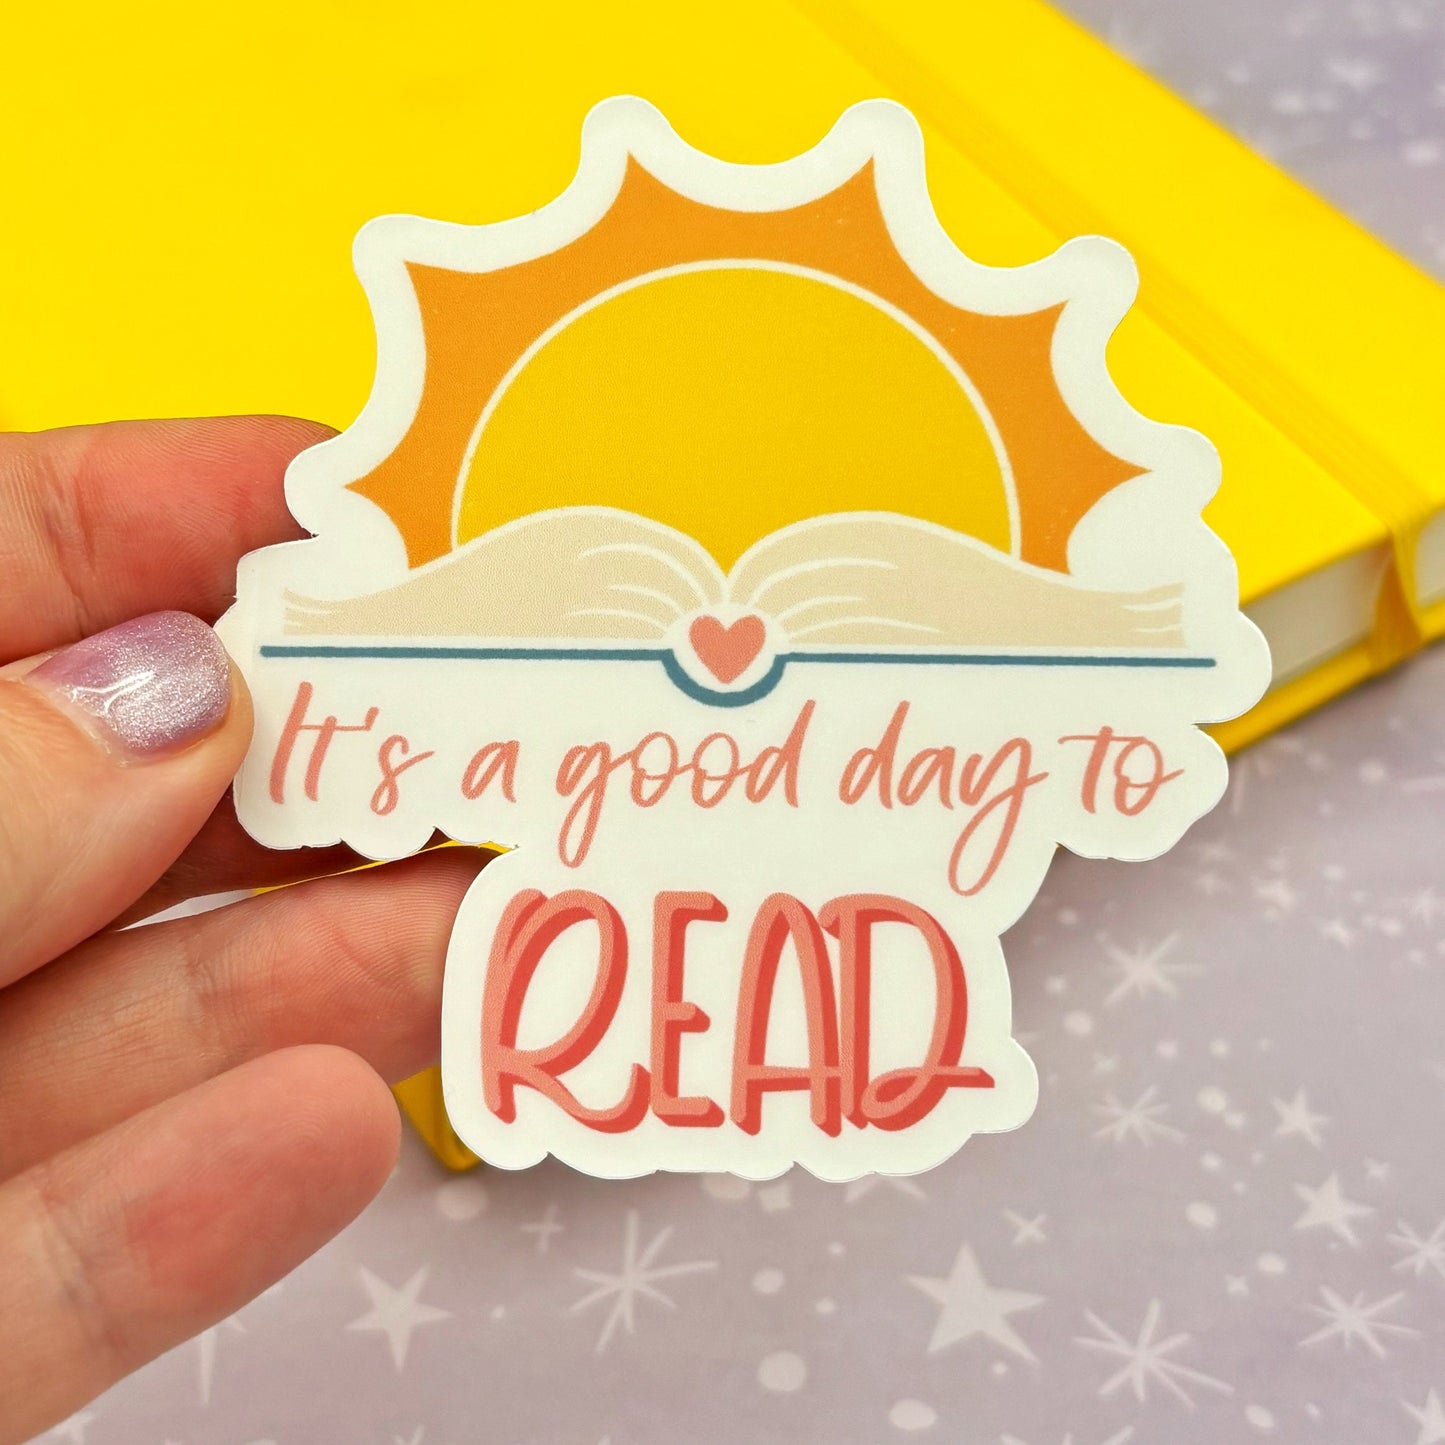 It's A Good Day to Read Sunny Day matte water resistant vinyl sticker for book lover